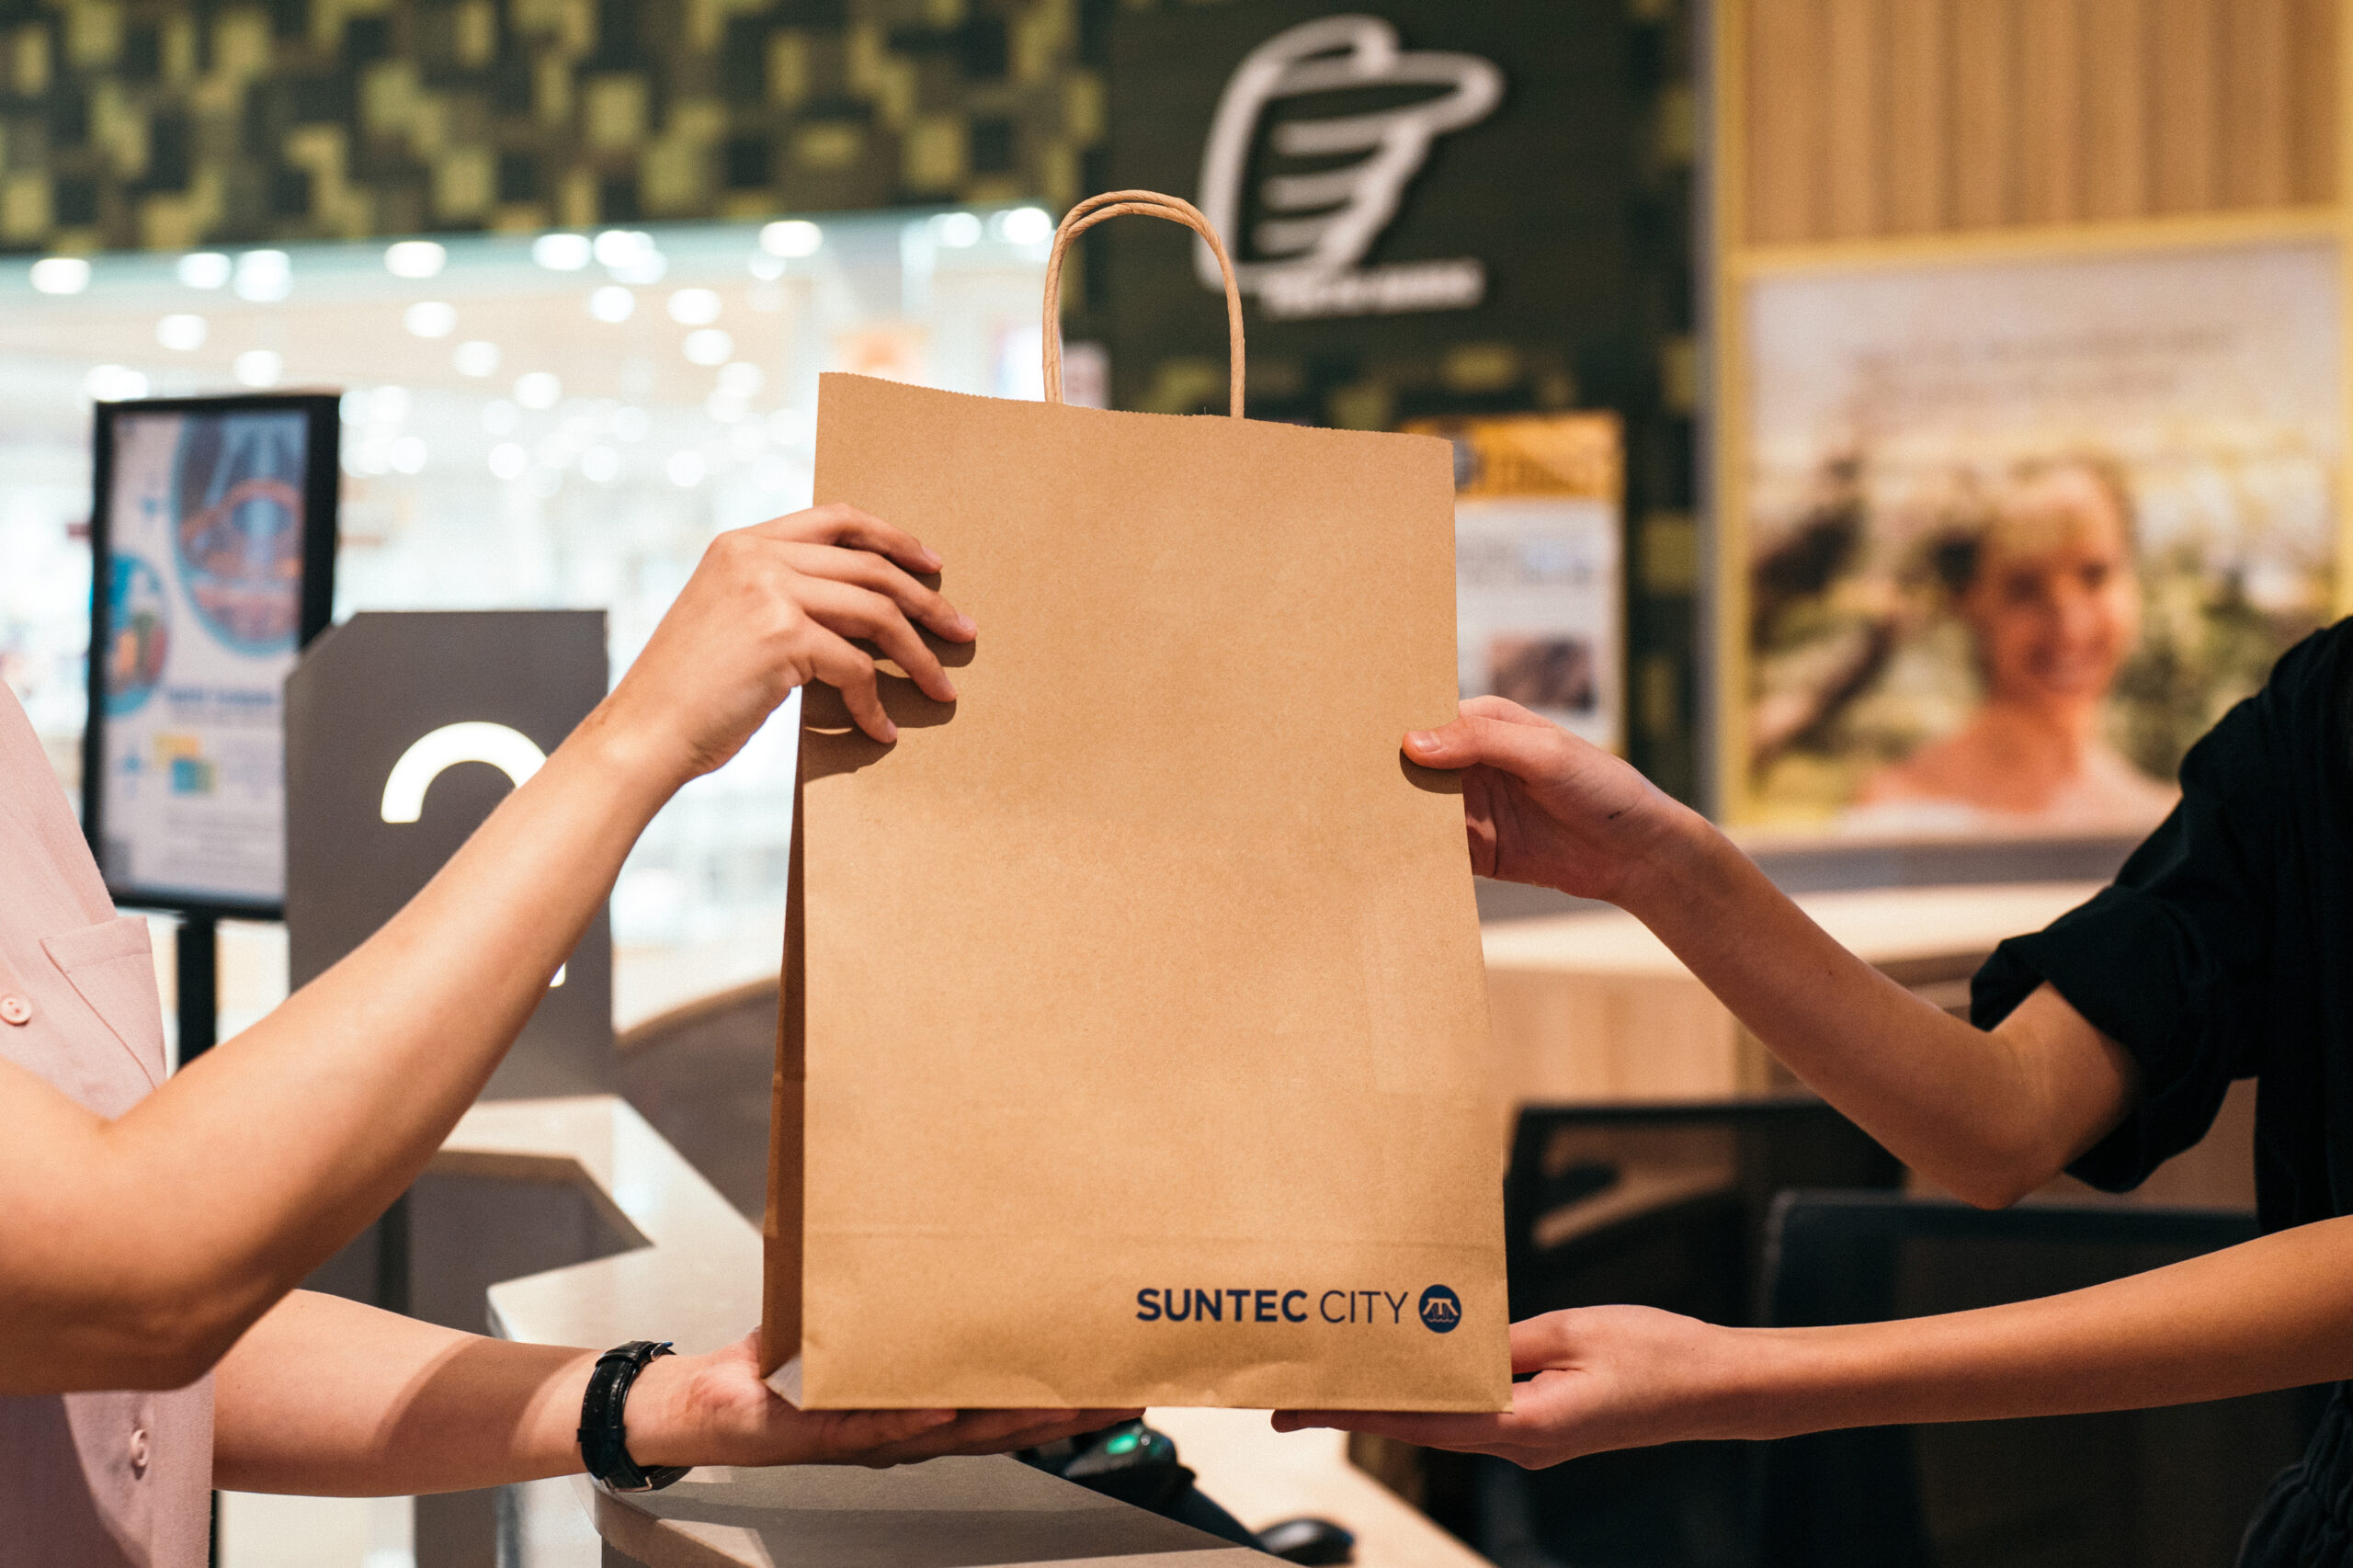 Green Lab work with Suntec City for FSC-certified kraft paper bags